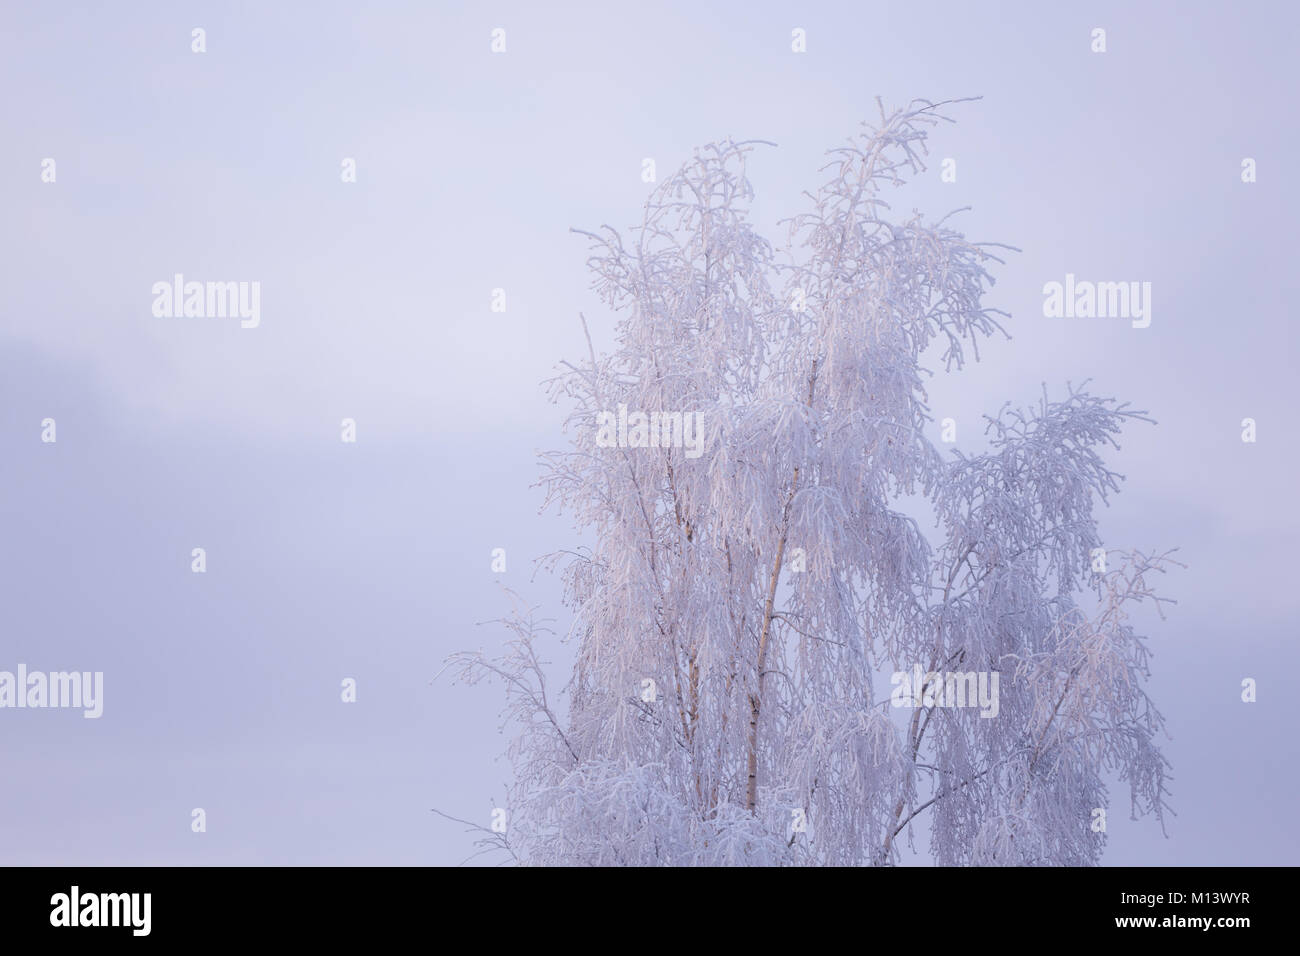 Birch tree top covered in snow Stock Photo